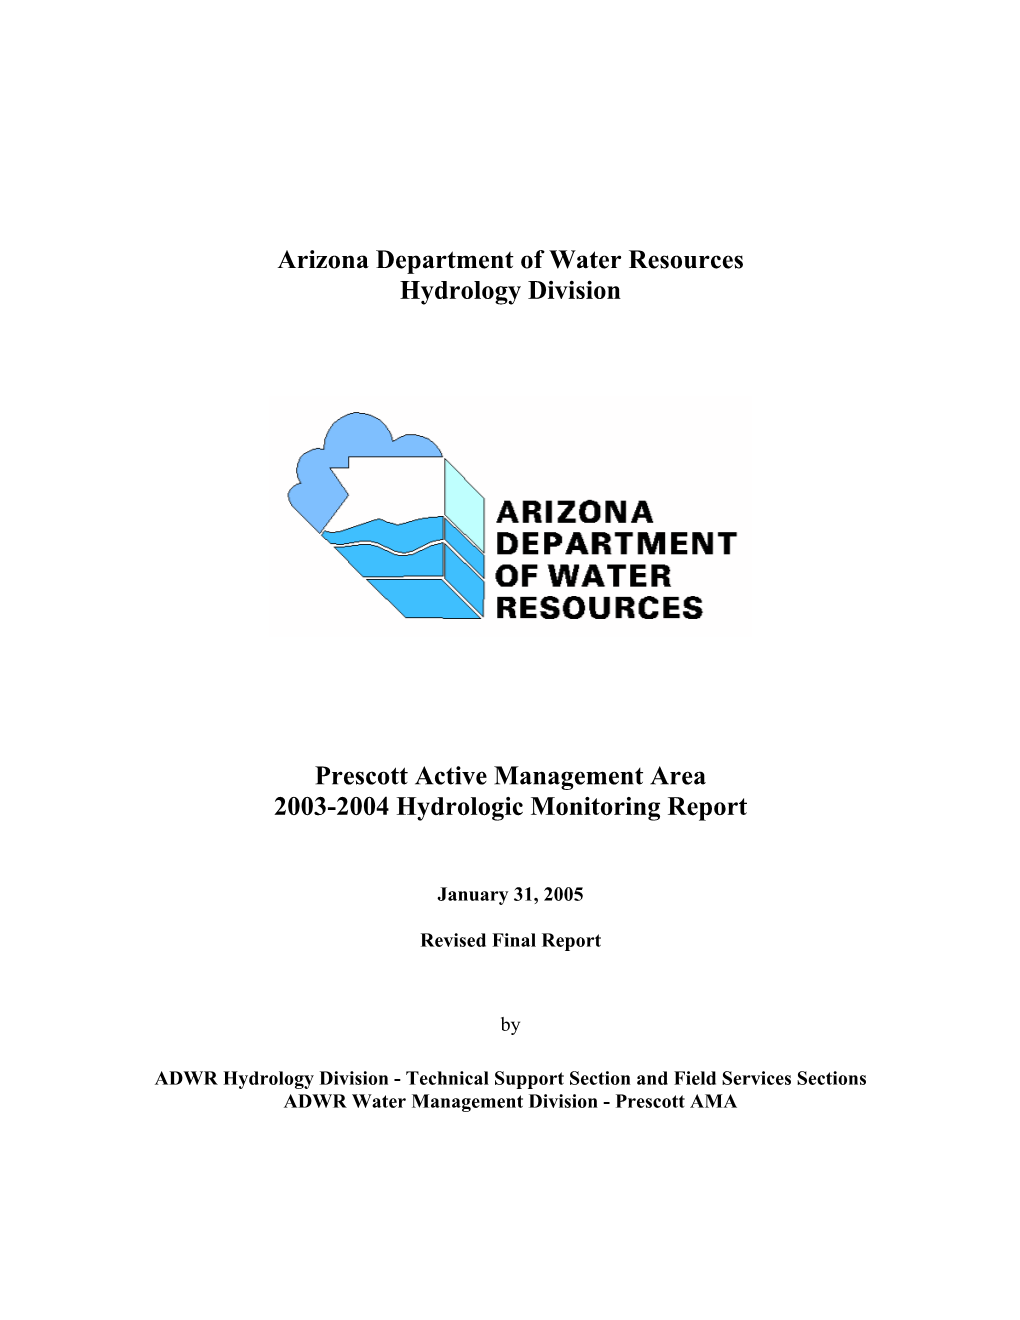 Arizona Department of Water Resources Hydrology Division